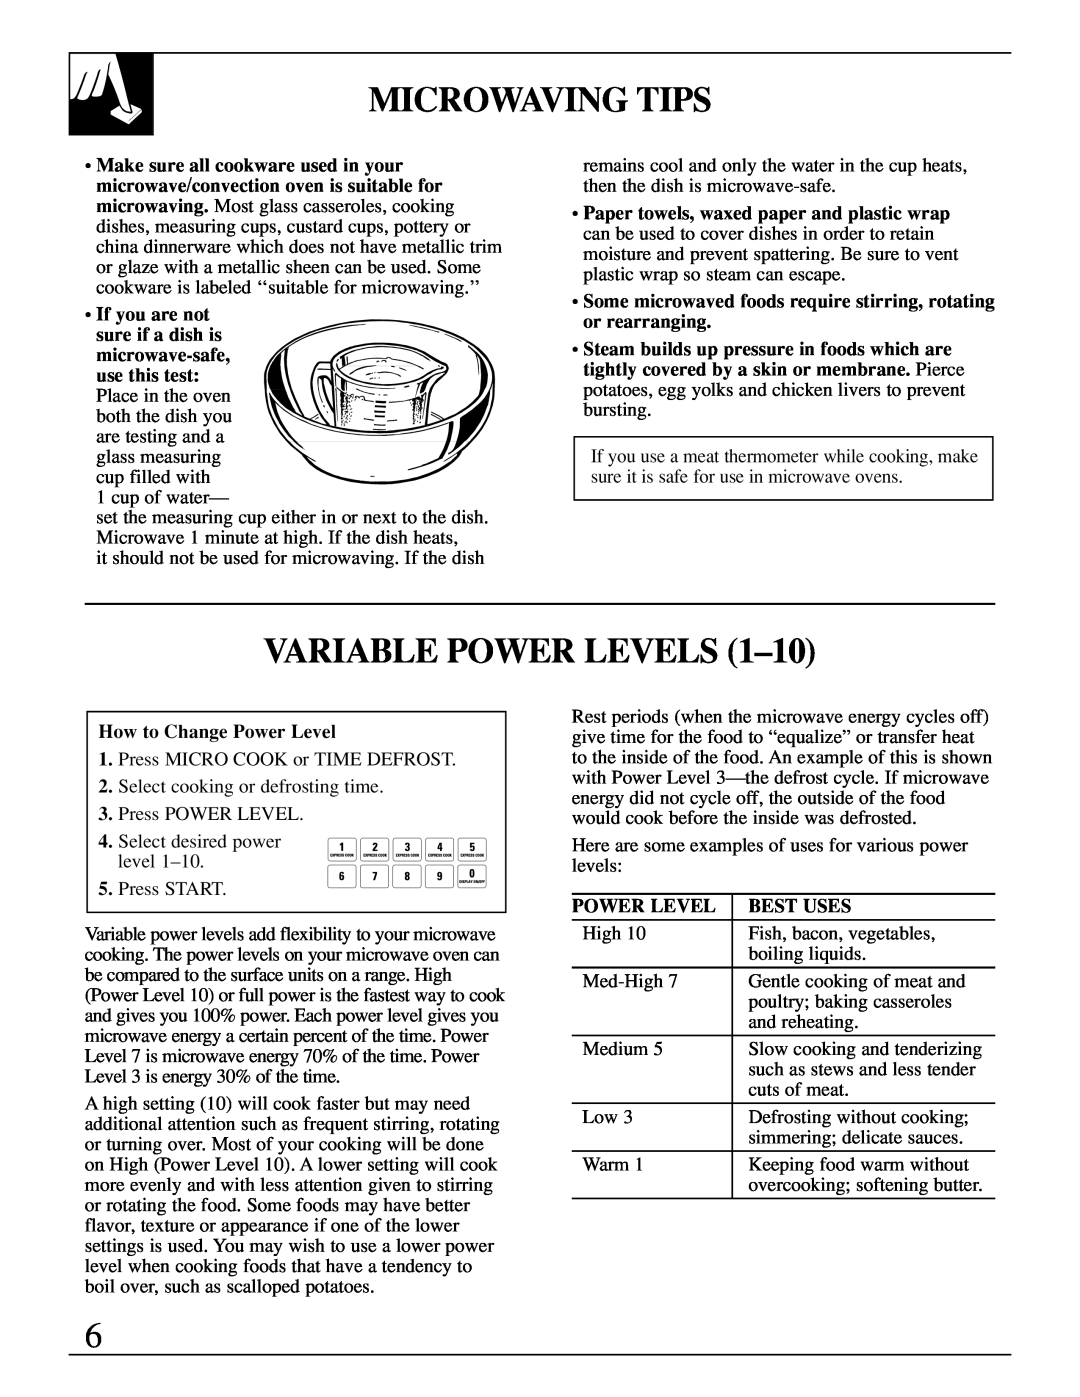 GE JEB1095 warranty Microwaving Tips, Variable Power Levels 